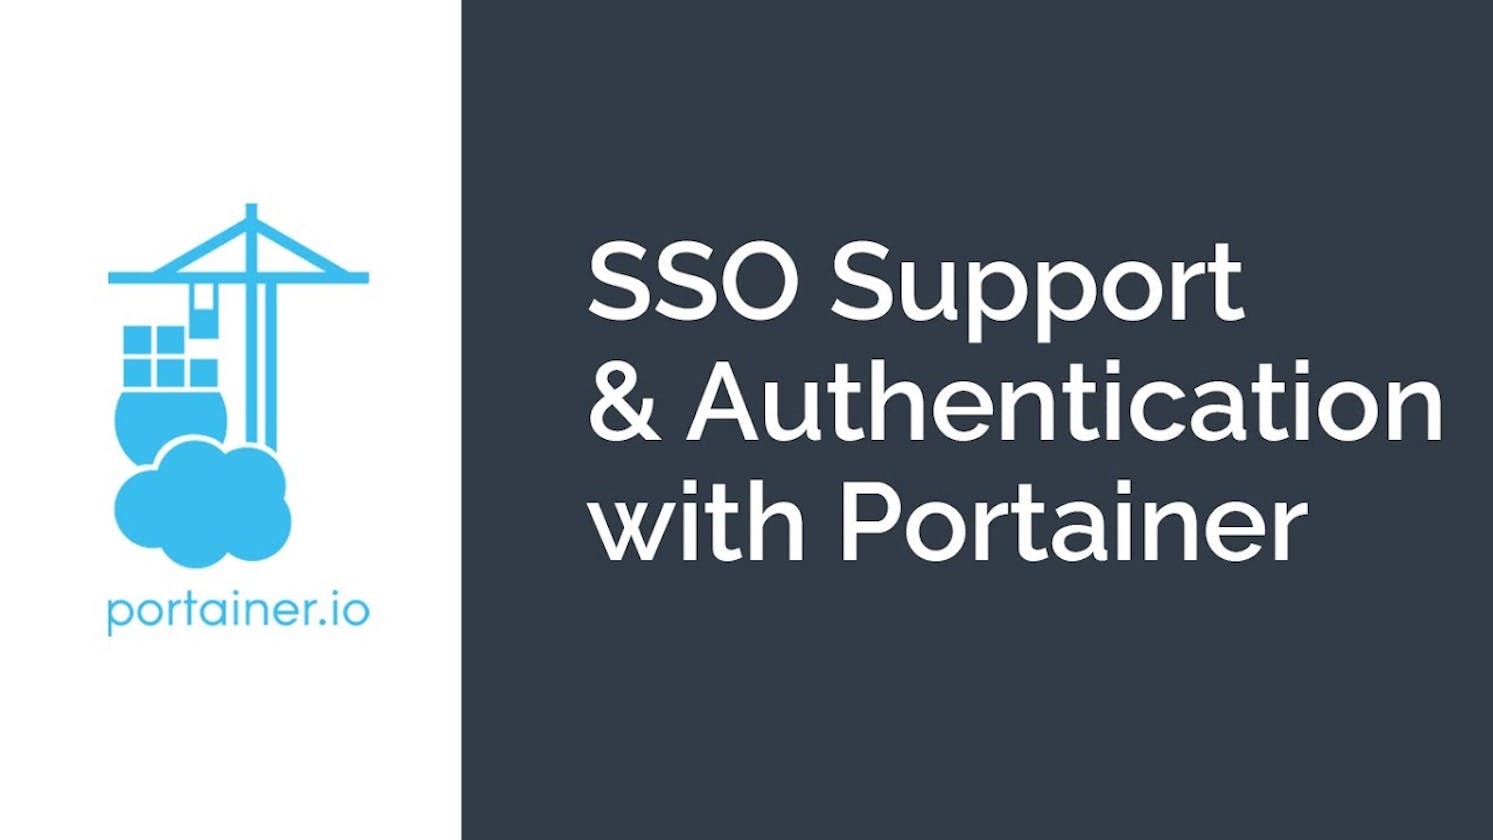 SSO Support & Authentication with Portainer using Microsoft OAuth provider